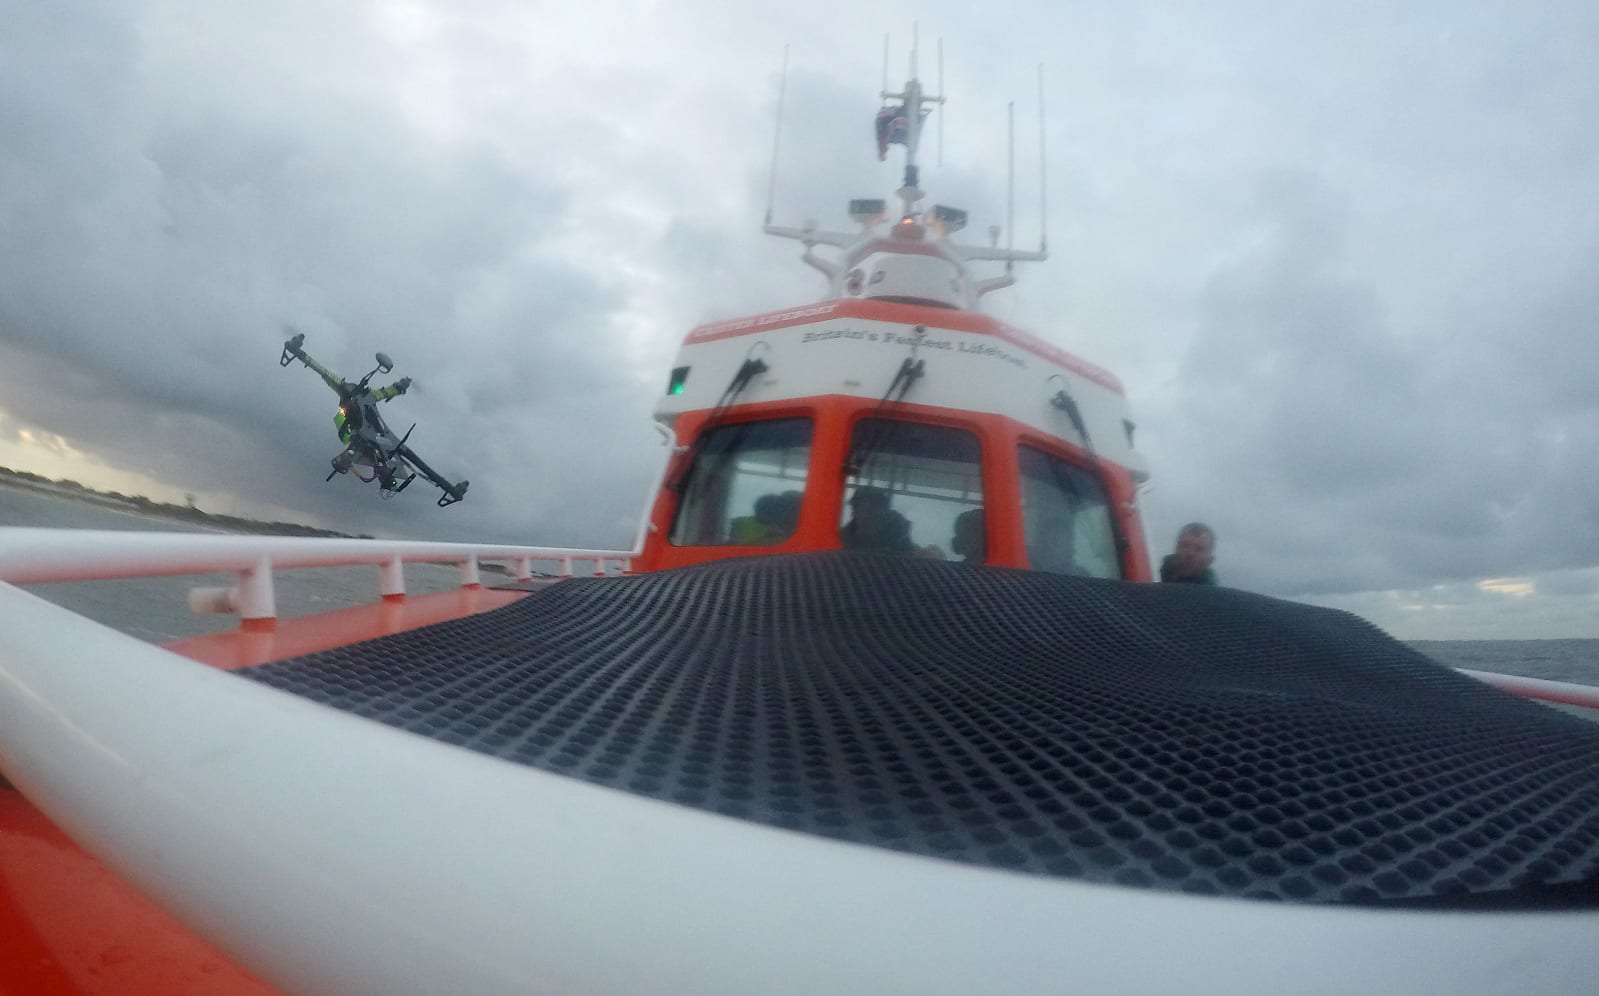 Lifeboat service at Caister trial drones